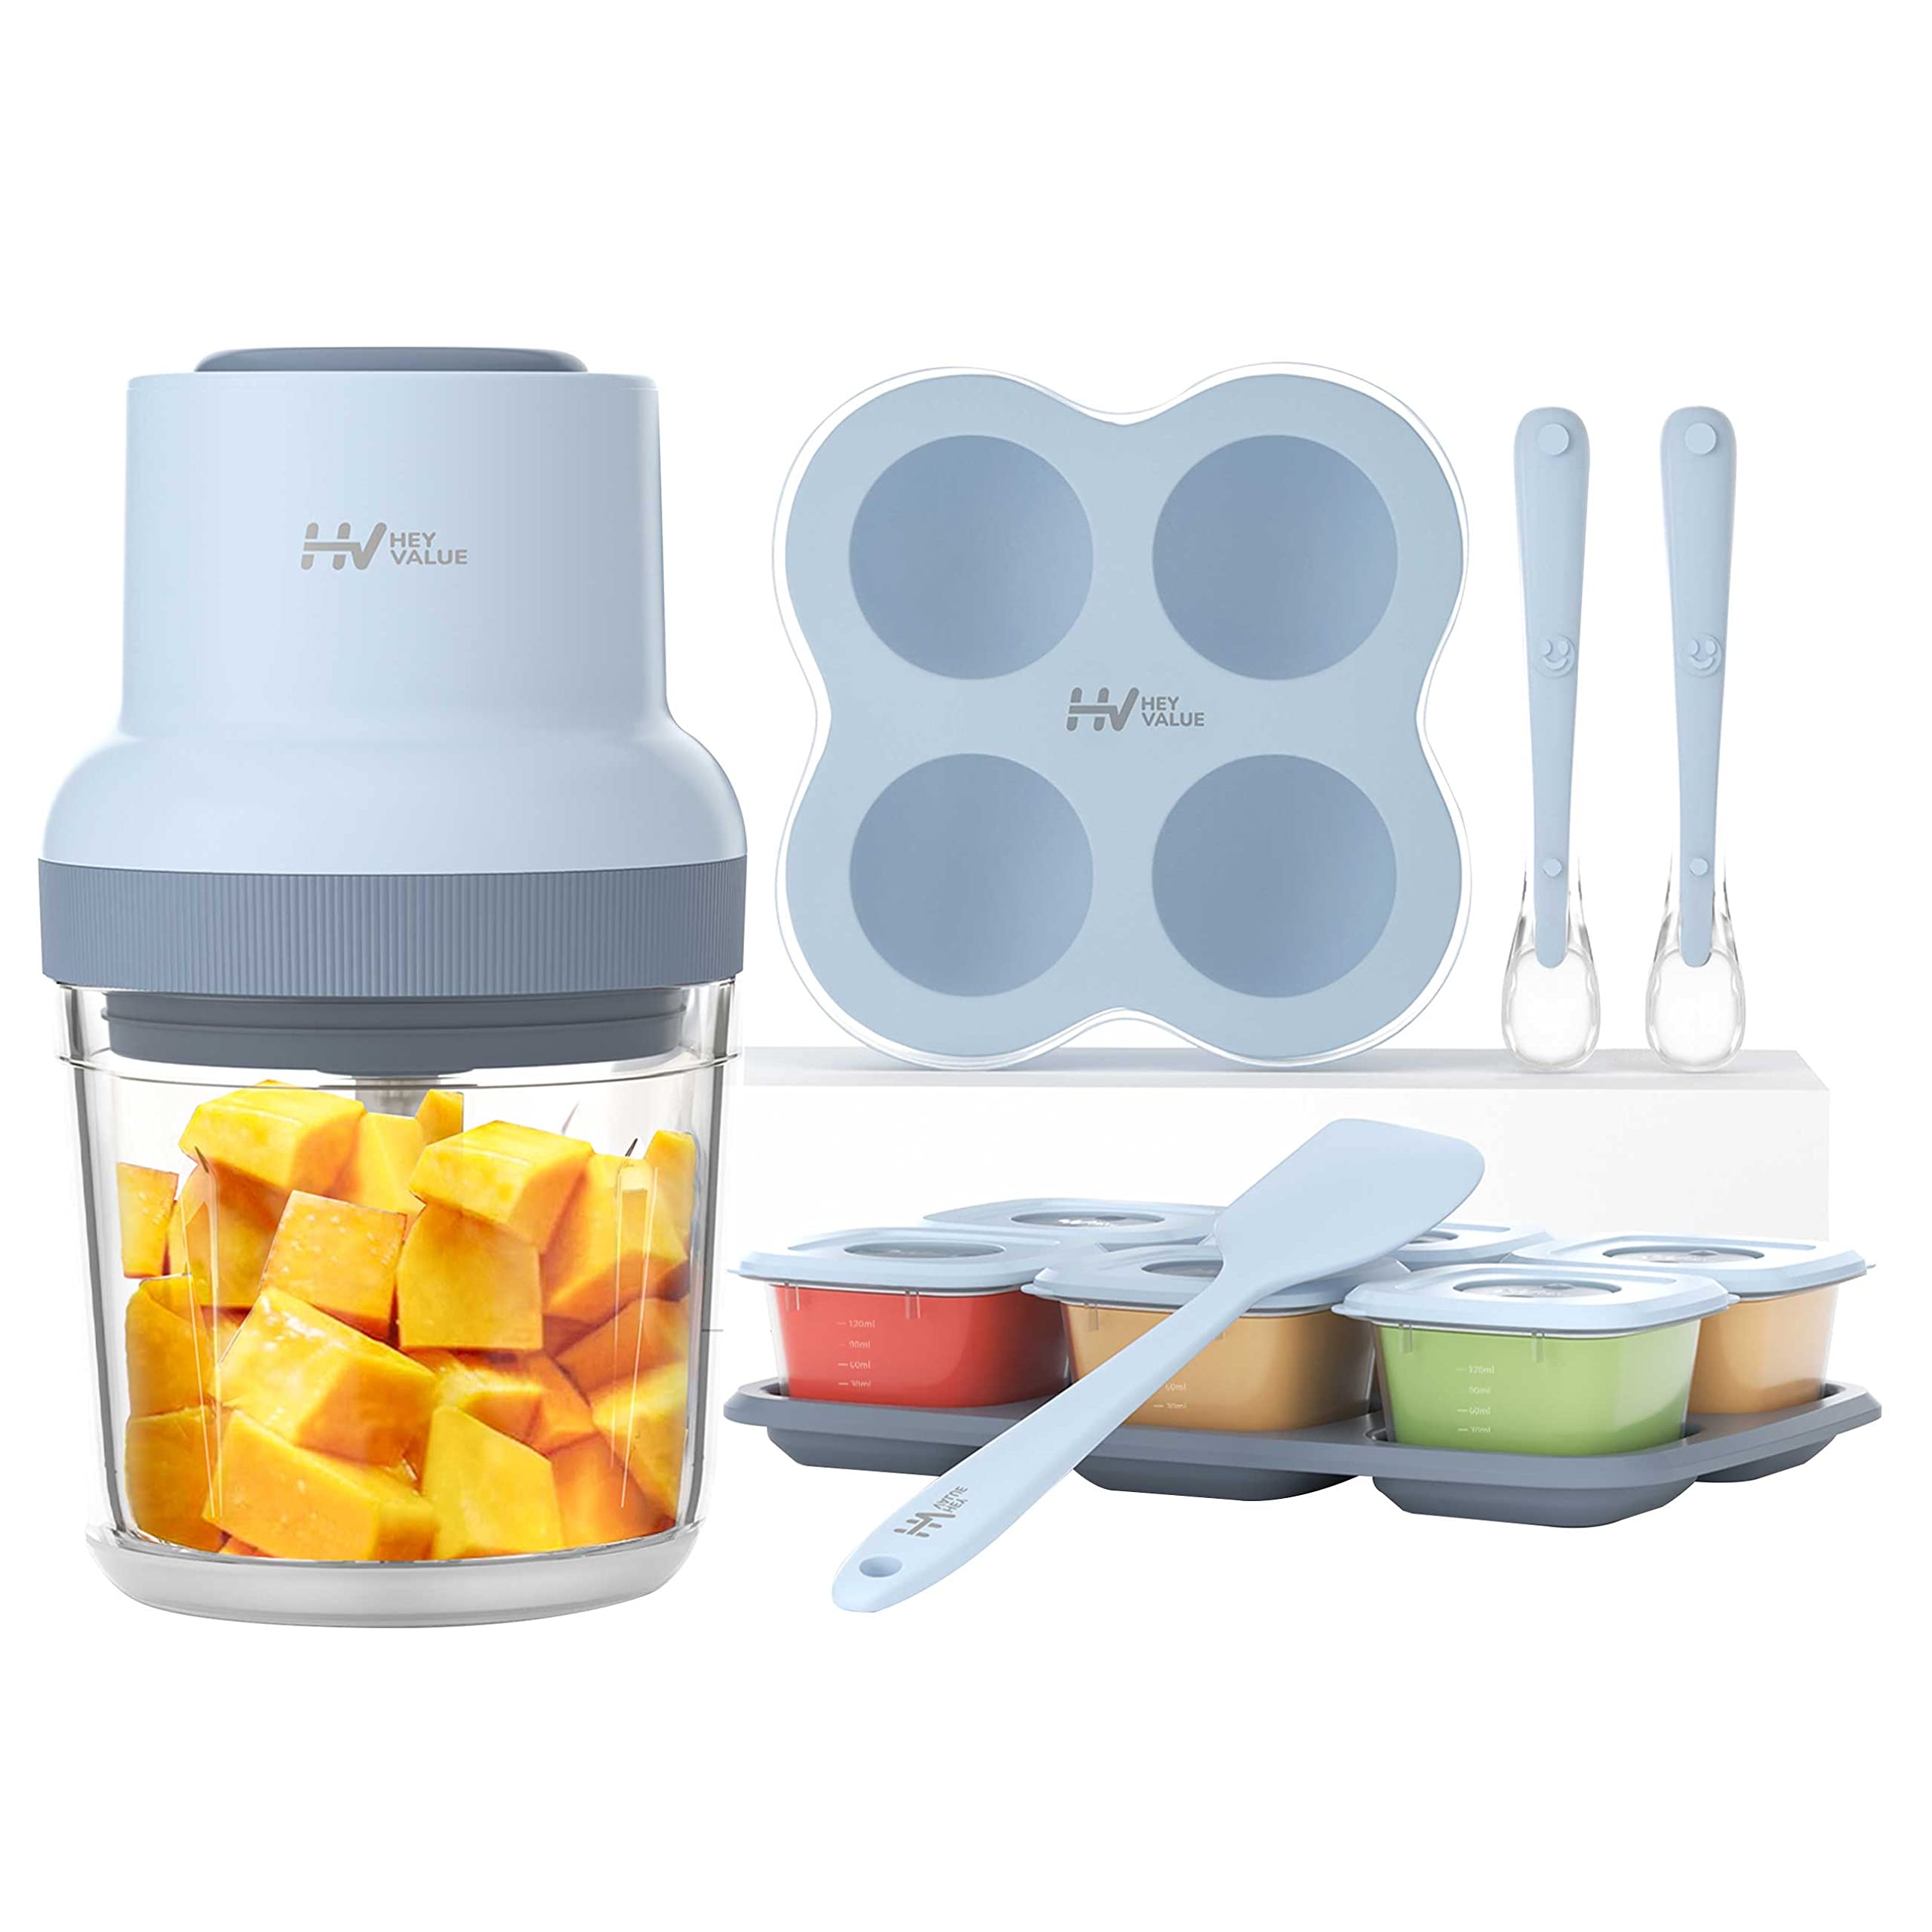 HEYVALUE Baby Food Maker, 13-in-1 Baby Food Processor gift Sets for Baby Food, Fruit, Vegatable, Meat, Baby Food Blender with Ba